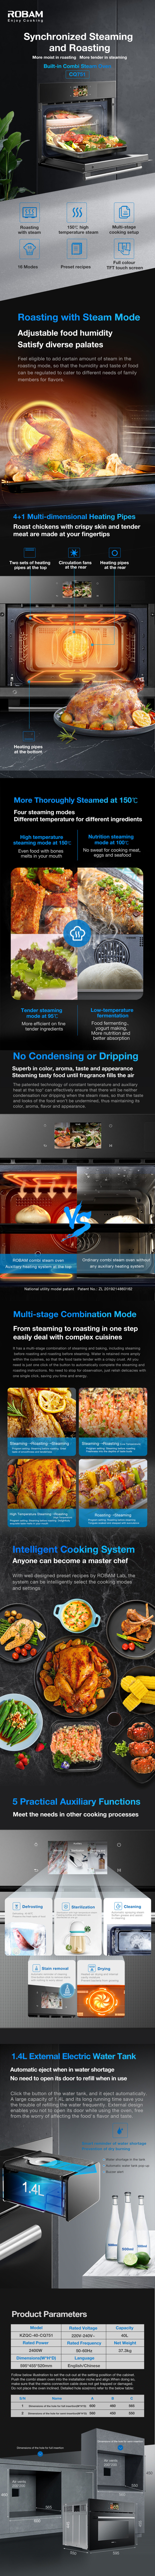 Roasting with steam mode,can adjustable food humidity.Feel eligible to add certain amount of steam in the roasting mode, so that the humidity and taste of food can be regulated to cater to different needs of family members for flavors 4 steaming modes,different temperature for different ingredients. ①High temperature steaming mode at 150℃②Nutrition steaming mode at 100℃③Tender steaming mode at 95℃④Low-temperature fermentation Multi-stage combination mode It has a multi-stage combination of steaming and baking, including steaming before roasting and roasting before steaming. All you need is just one click of the button to automatically complete the steaming and roasting instructions. 5 practical auxiliary functions ①Defrosting  40-80°C②Sterilization with high temperature steam③Automatic spraying steam④One-button-click to remove stains with nothing to worry about⑤Heated-air drying and internal cavity moisture